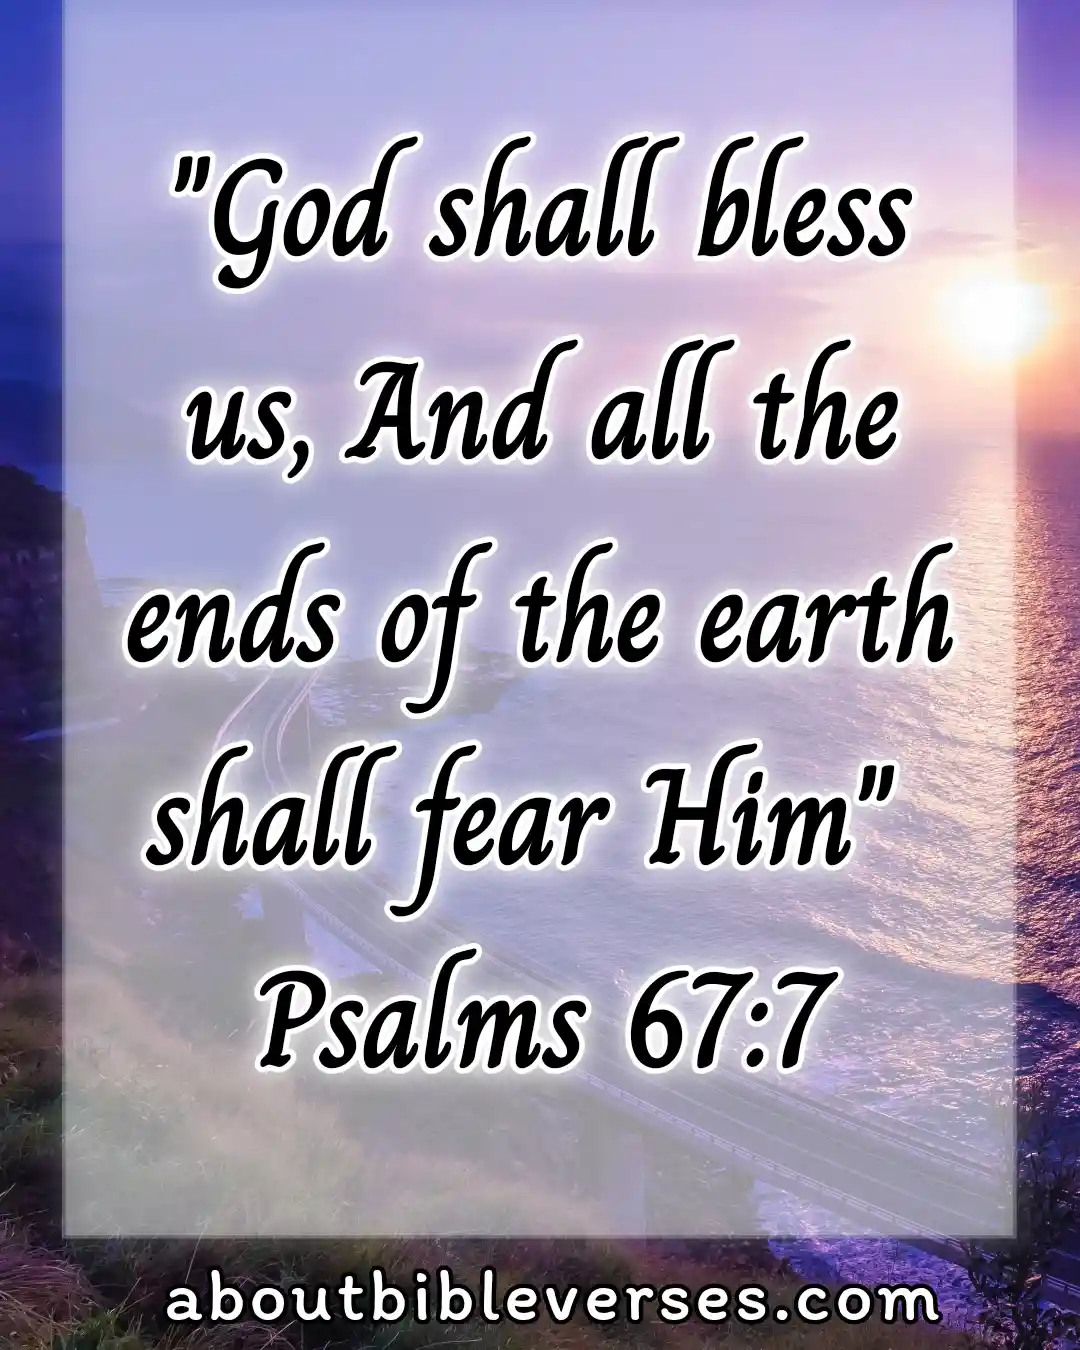 Happy Morning Tuesday Blessings Bible Verse (Psalm 67:7)